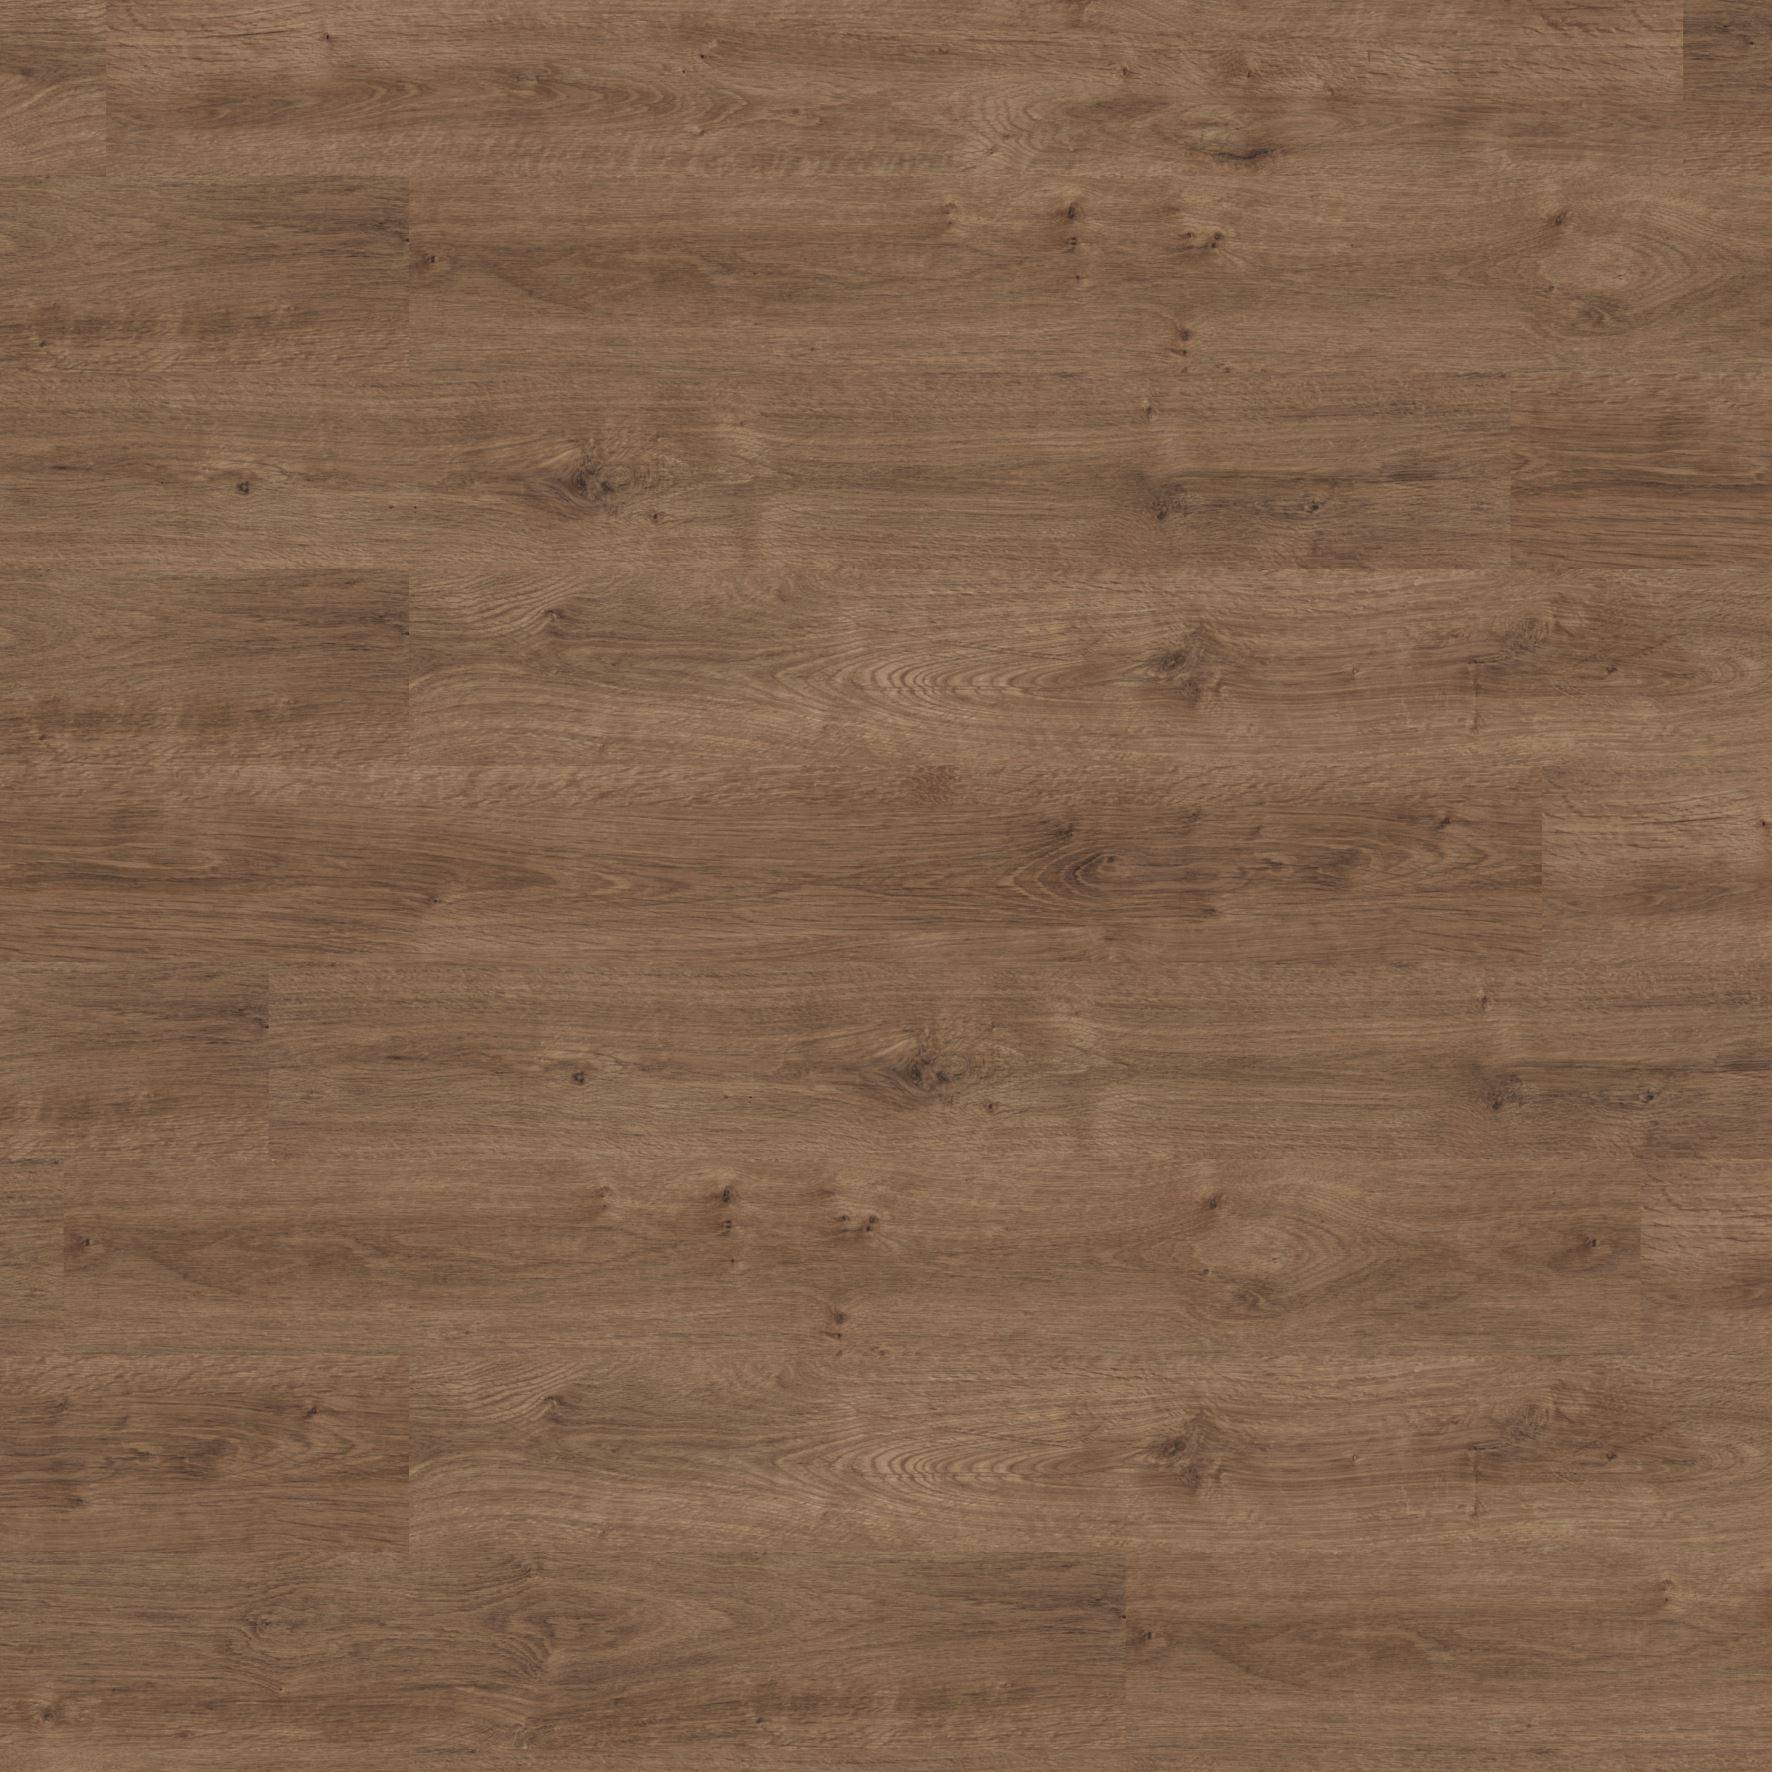 Polyflor Expona Commercial Amber Classic Oak 4087